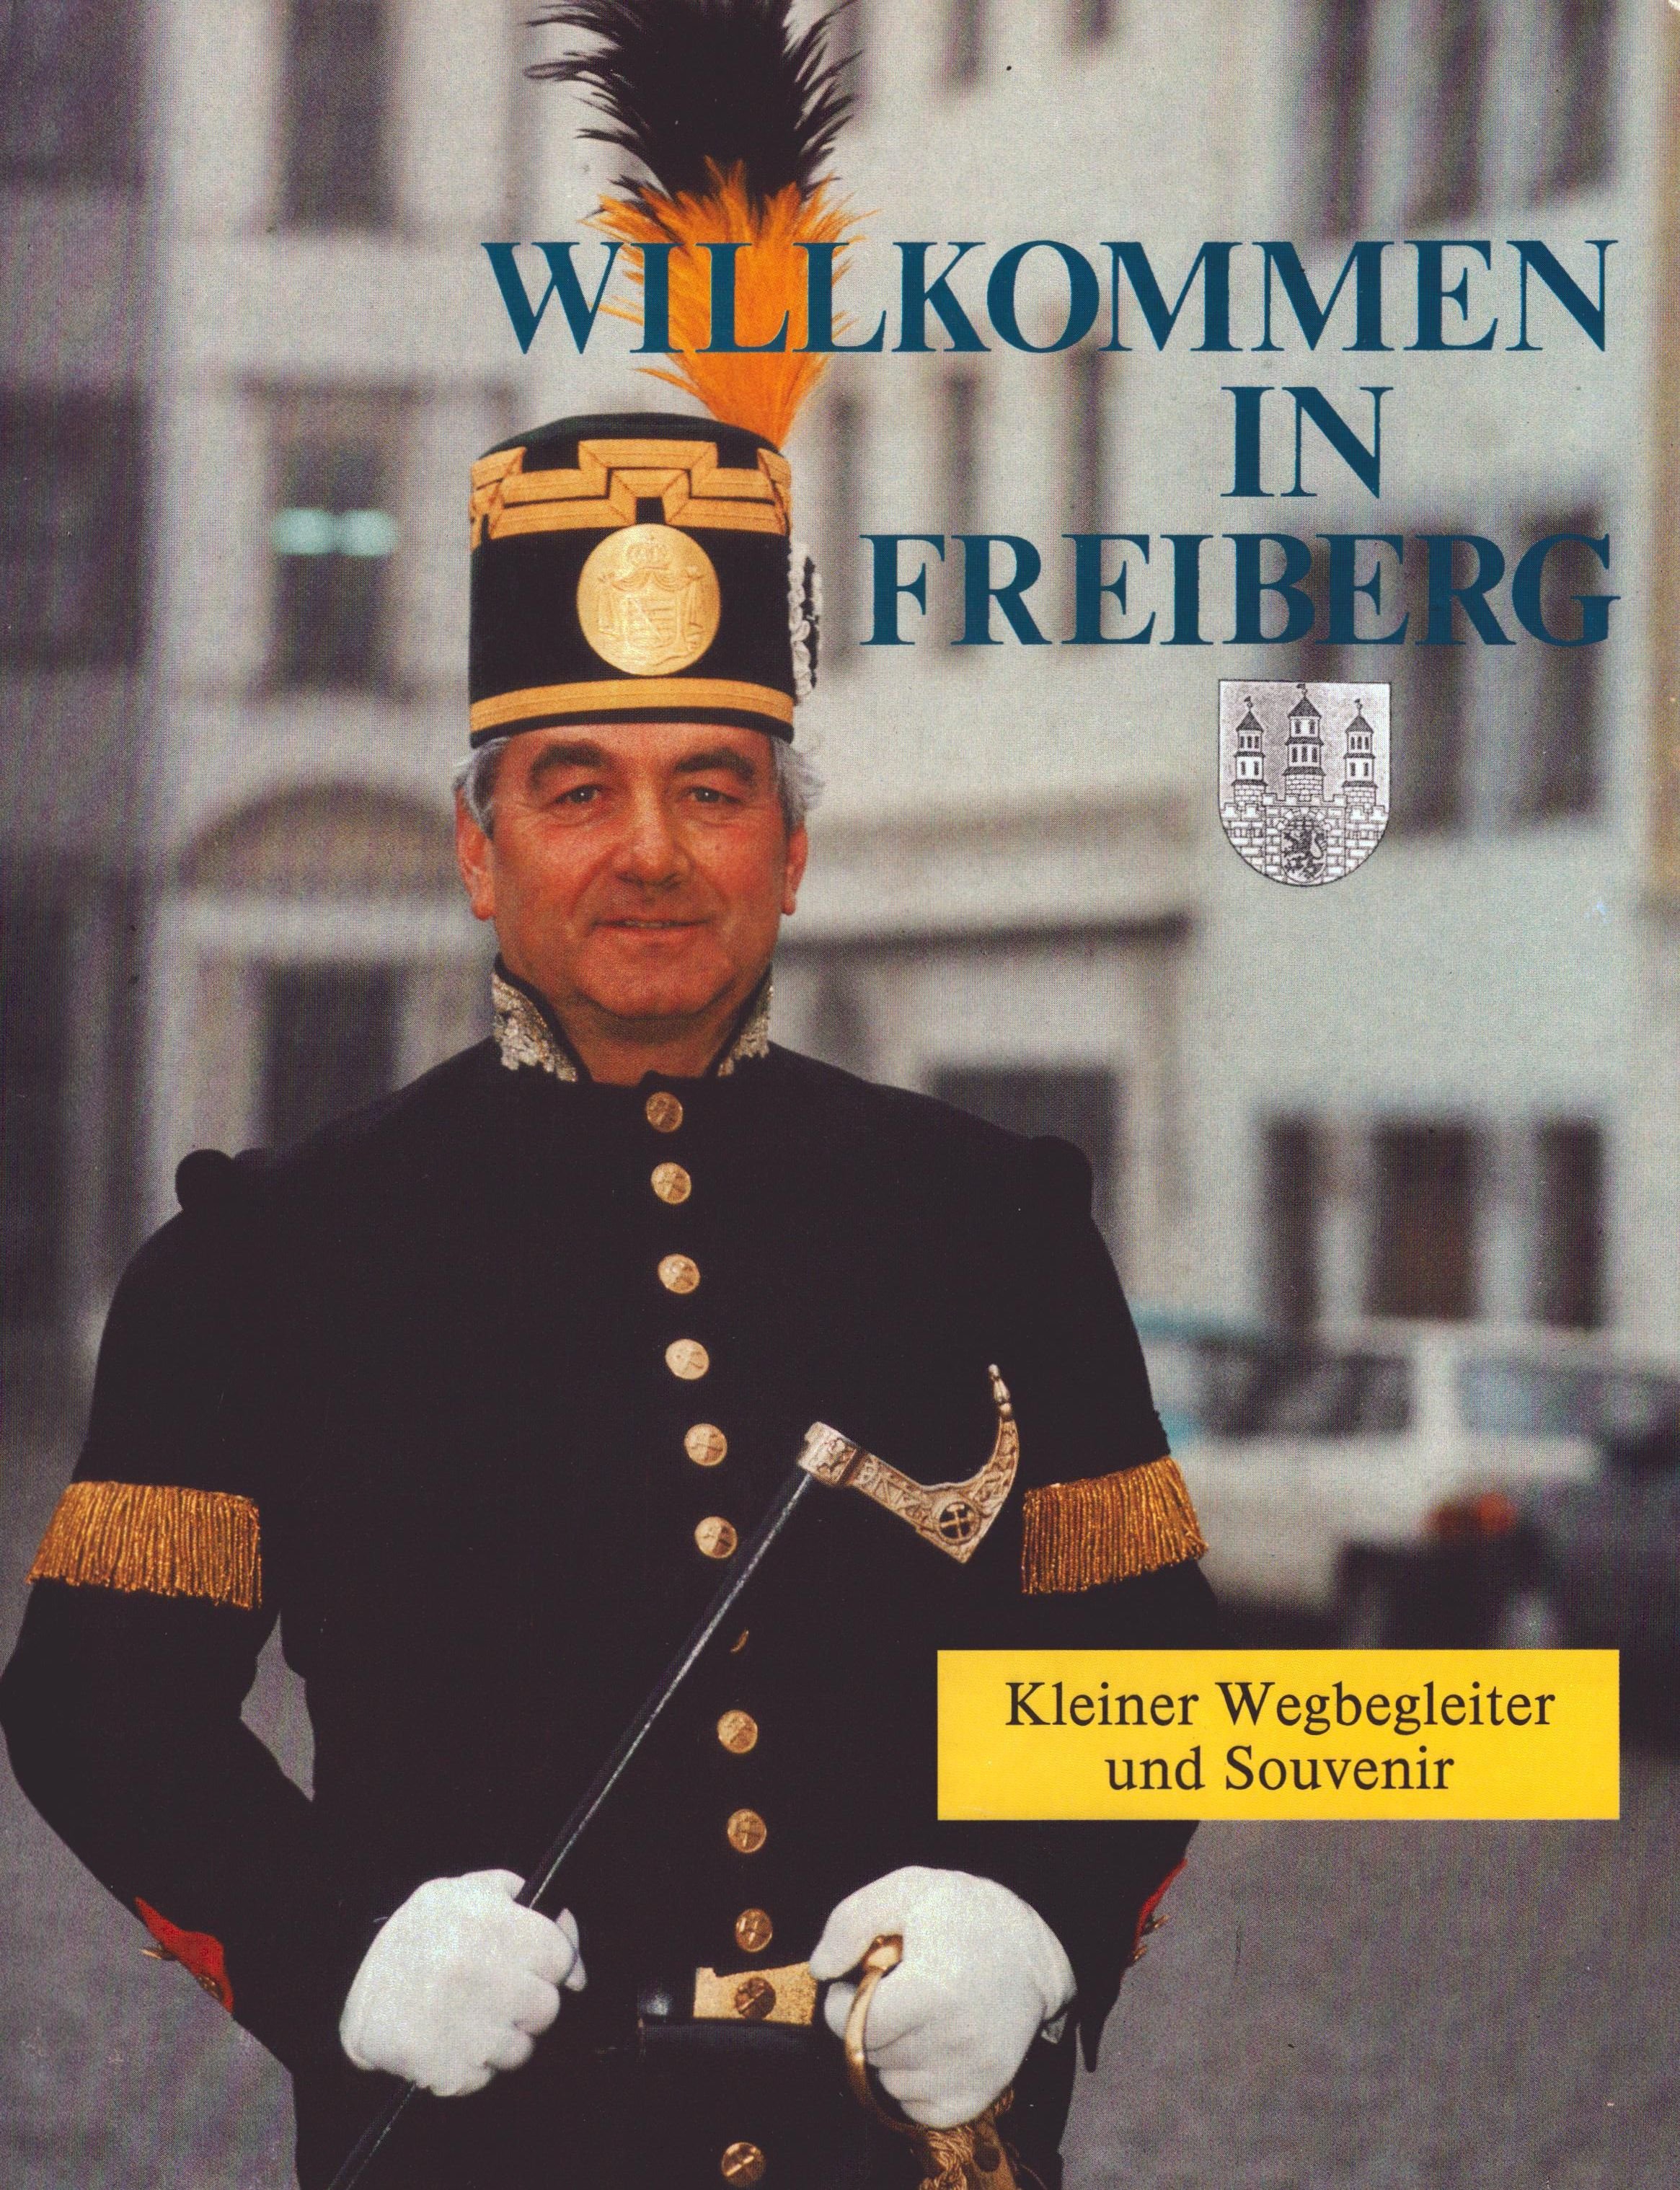 Willkommen in Freiberg (Archiv SAXONIA-FREIBERG-STIFTUNG CC BY-NC-SA)